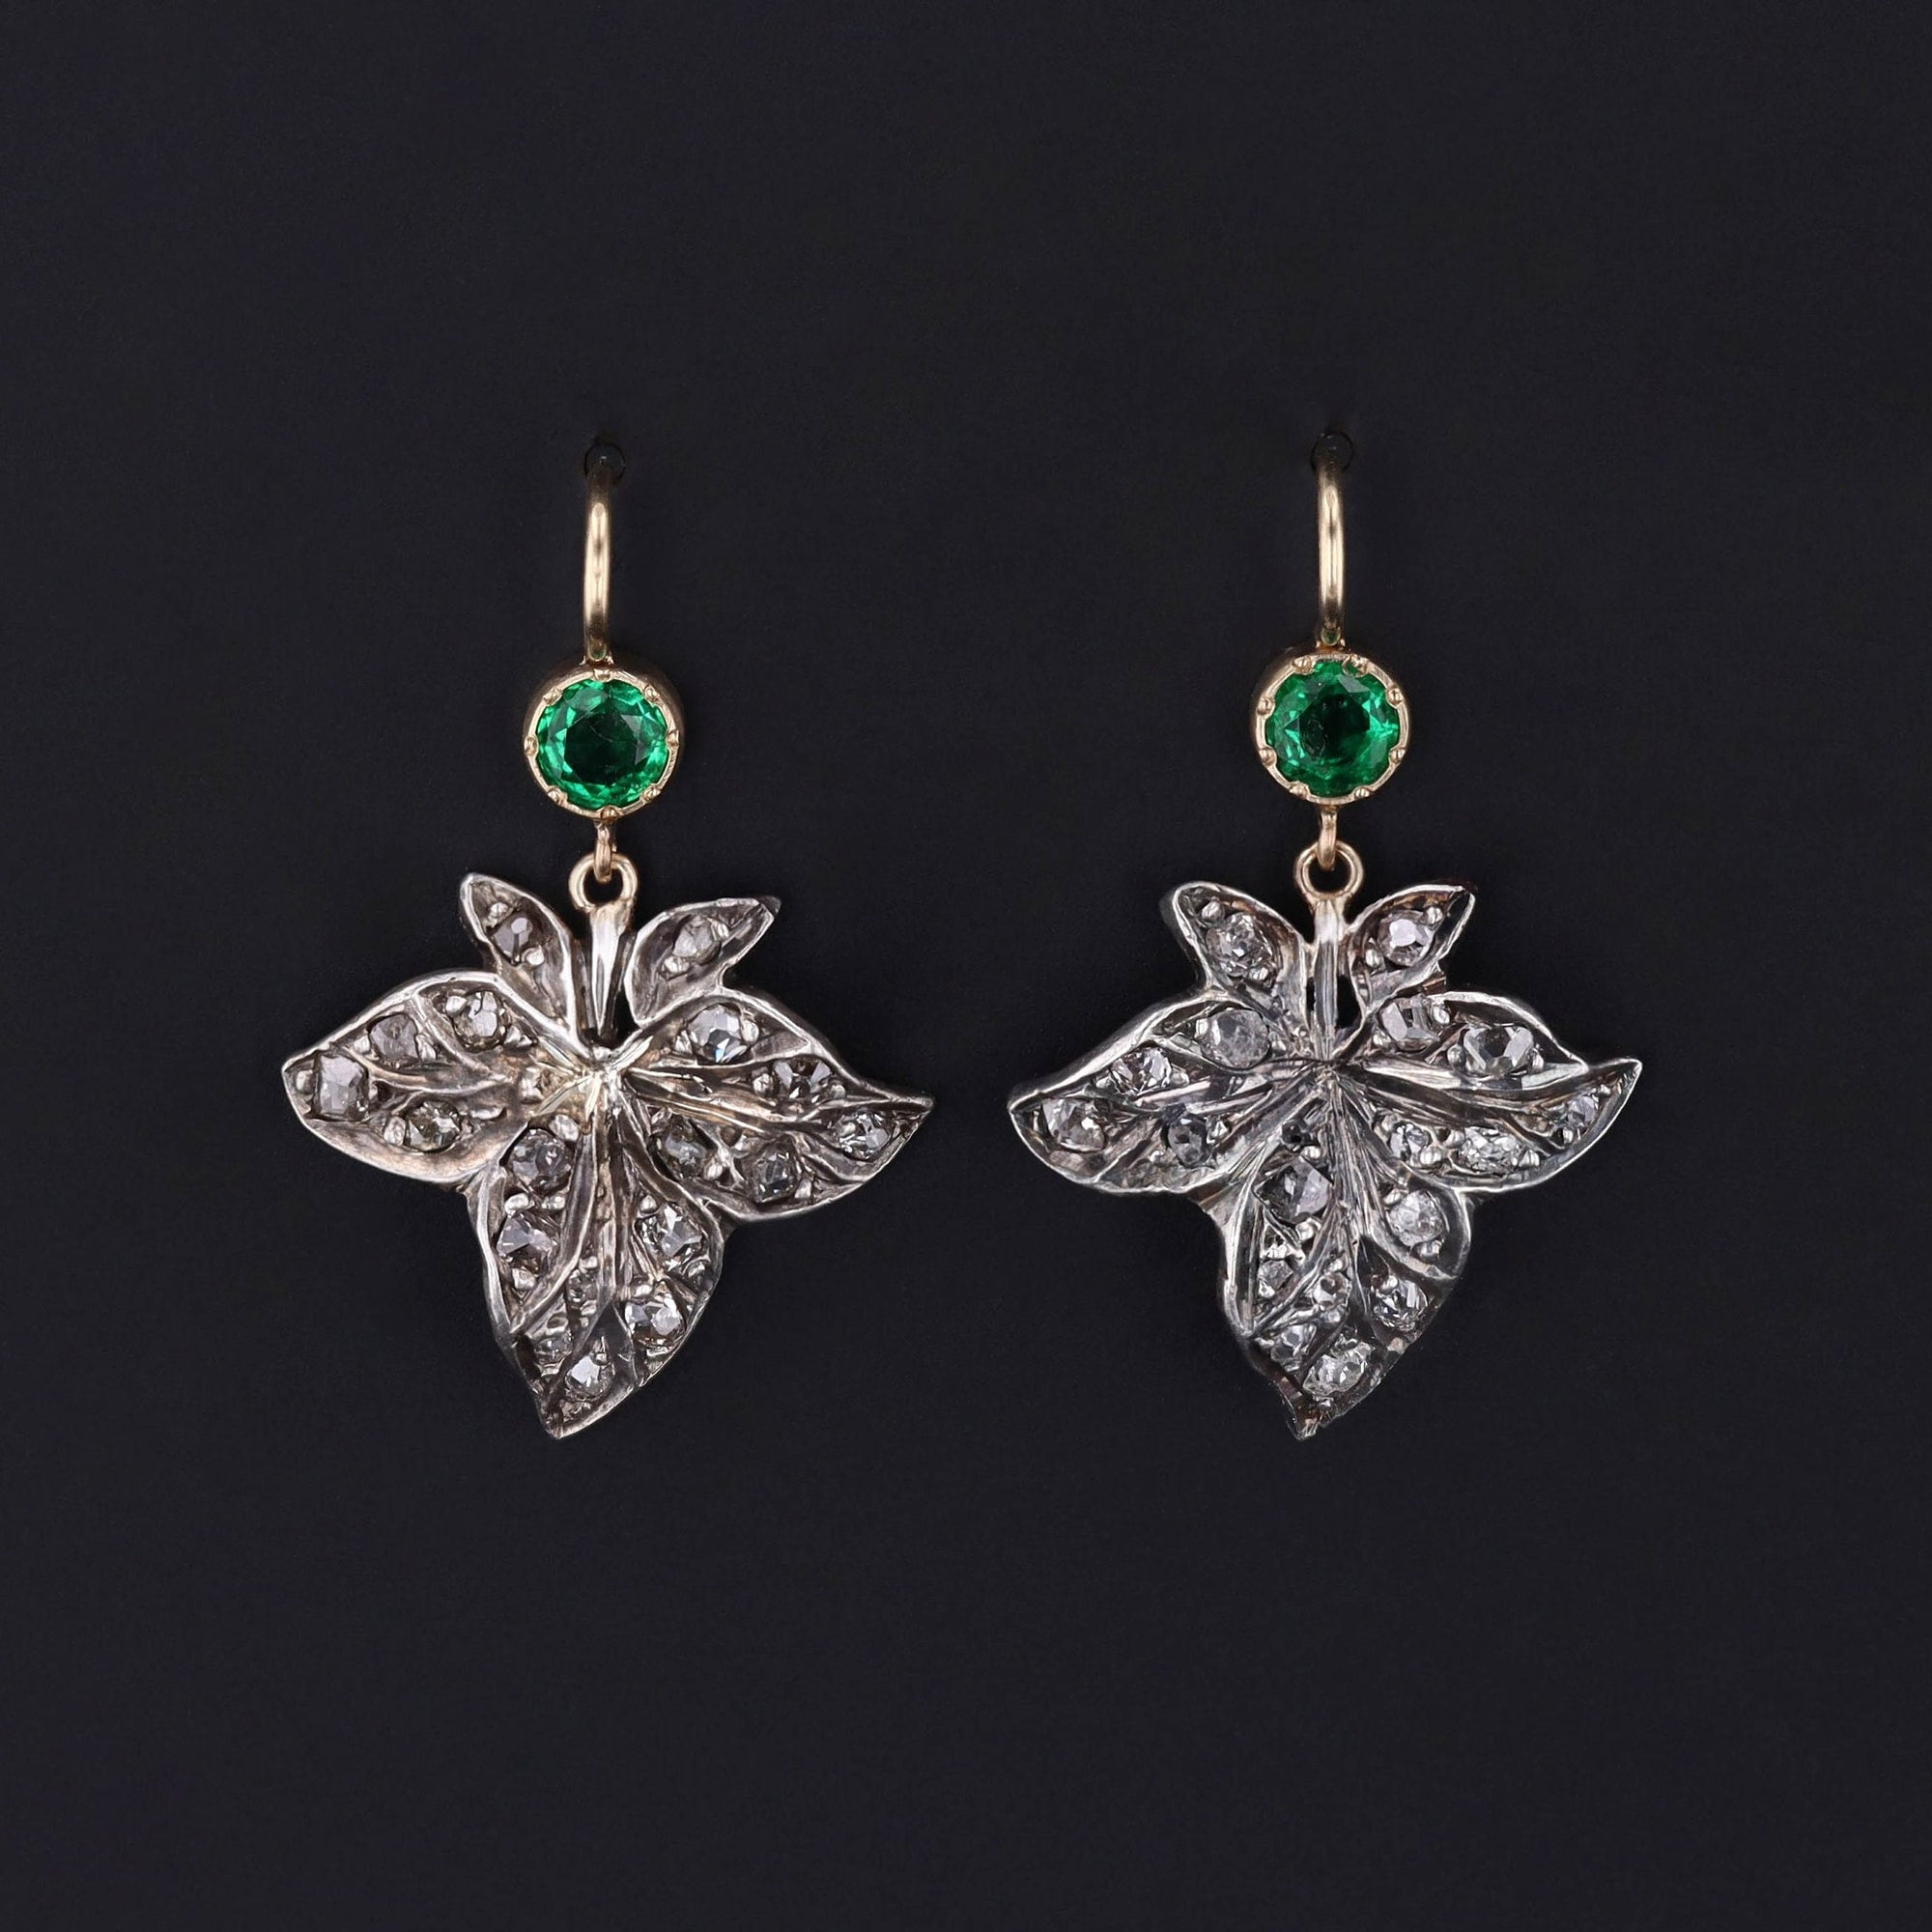 Antique Diamond and Emerald Leaf Earrings Created from an Antique Victorian Brooch